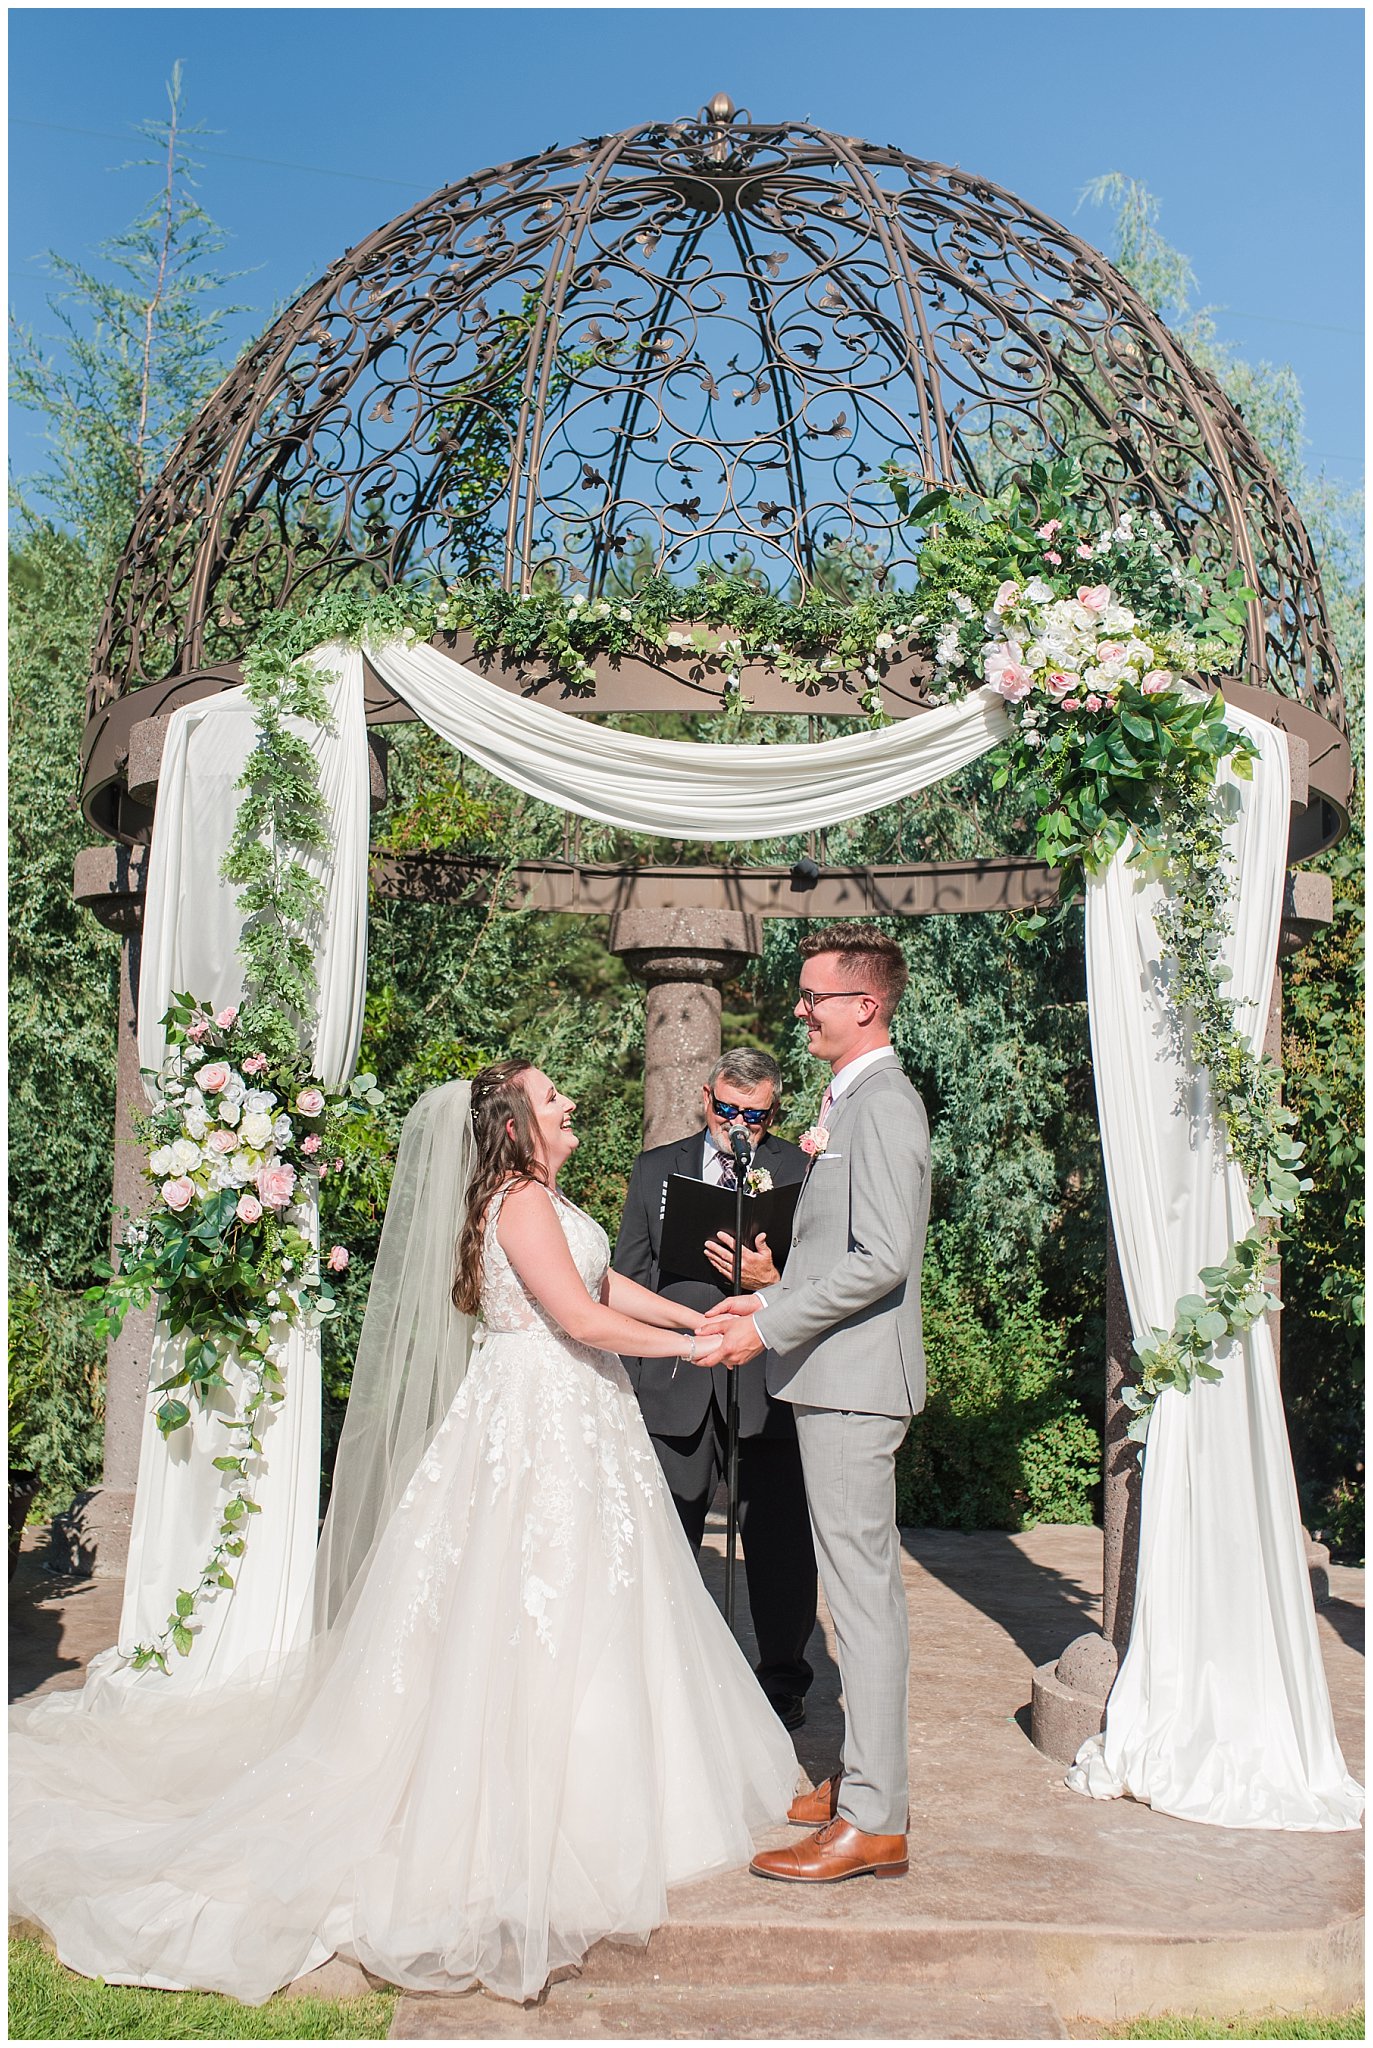 Bride and groom laugh during ceremony | Oak Hills Utah Dusty Rose and Gray Summer Wedding | Jessie and Dallin Photography